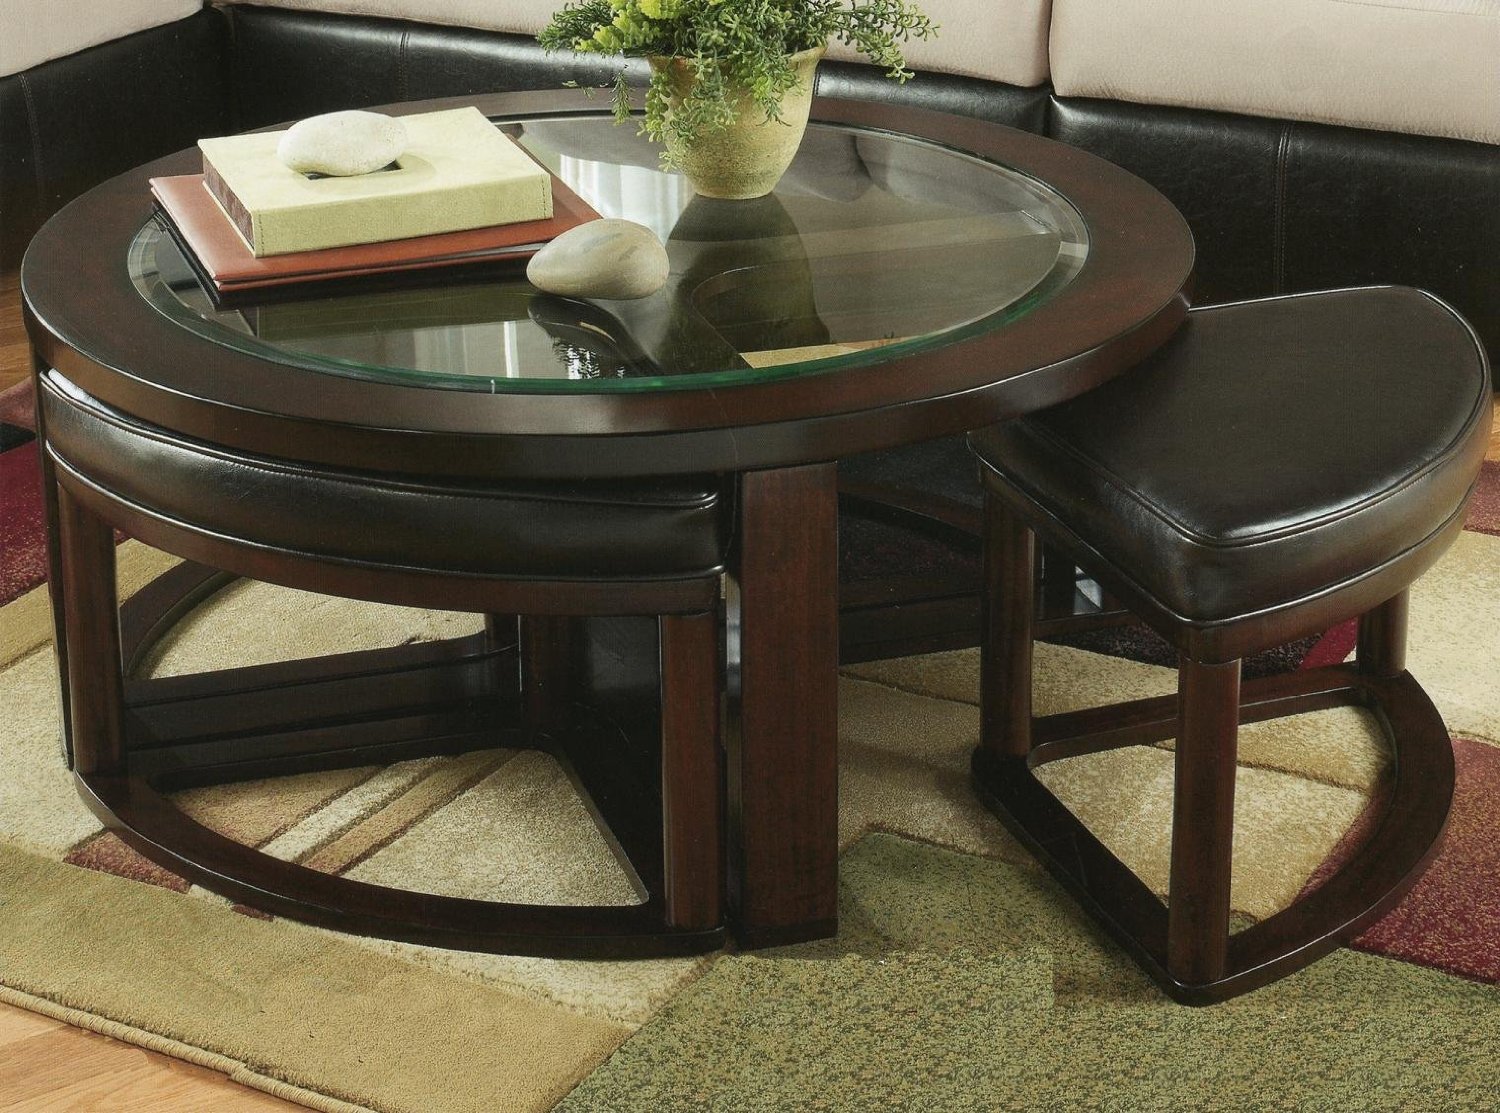 Round Coffee Table Ottomans Underneath : How To Choose A Coffee Table Or Ottoman Plus 15 Favorites - Now your coffee table can be a small dining space with minimal effort.